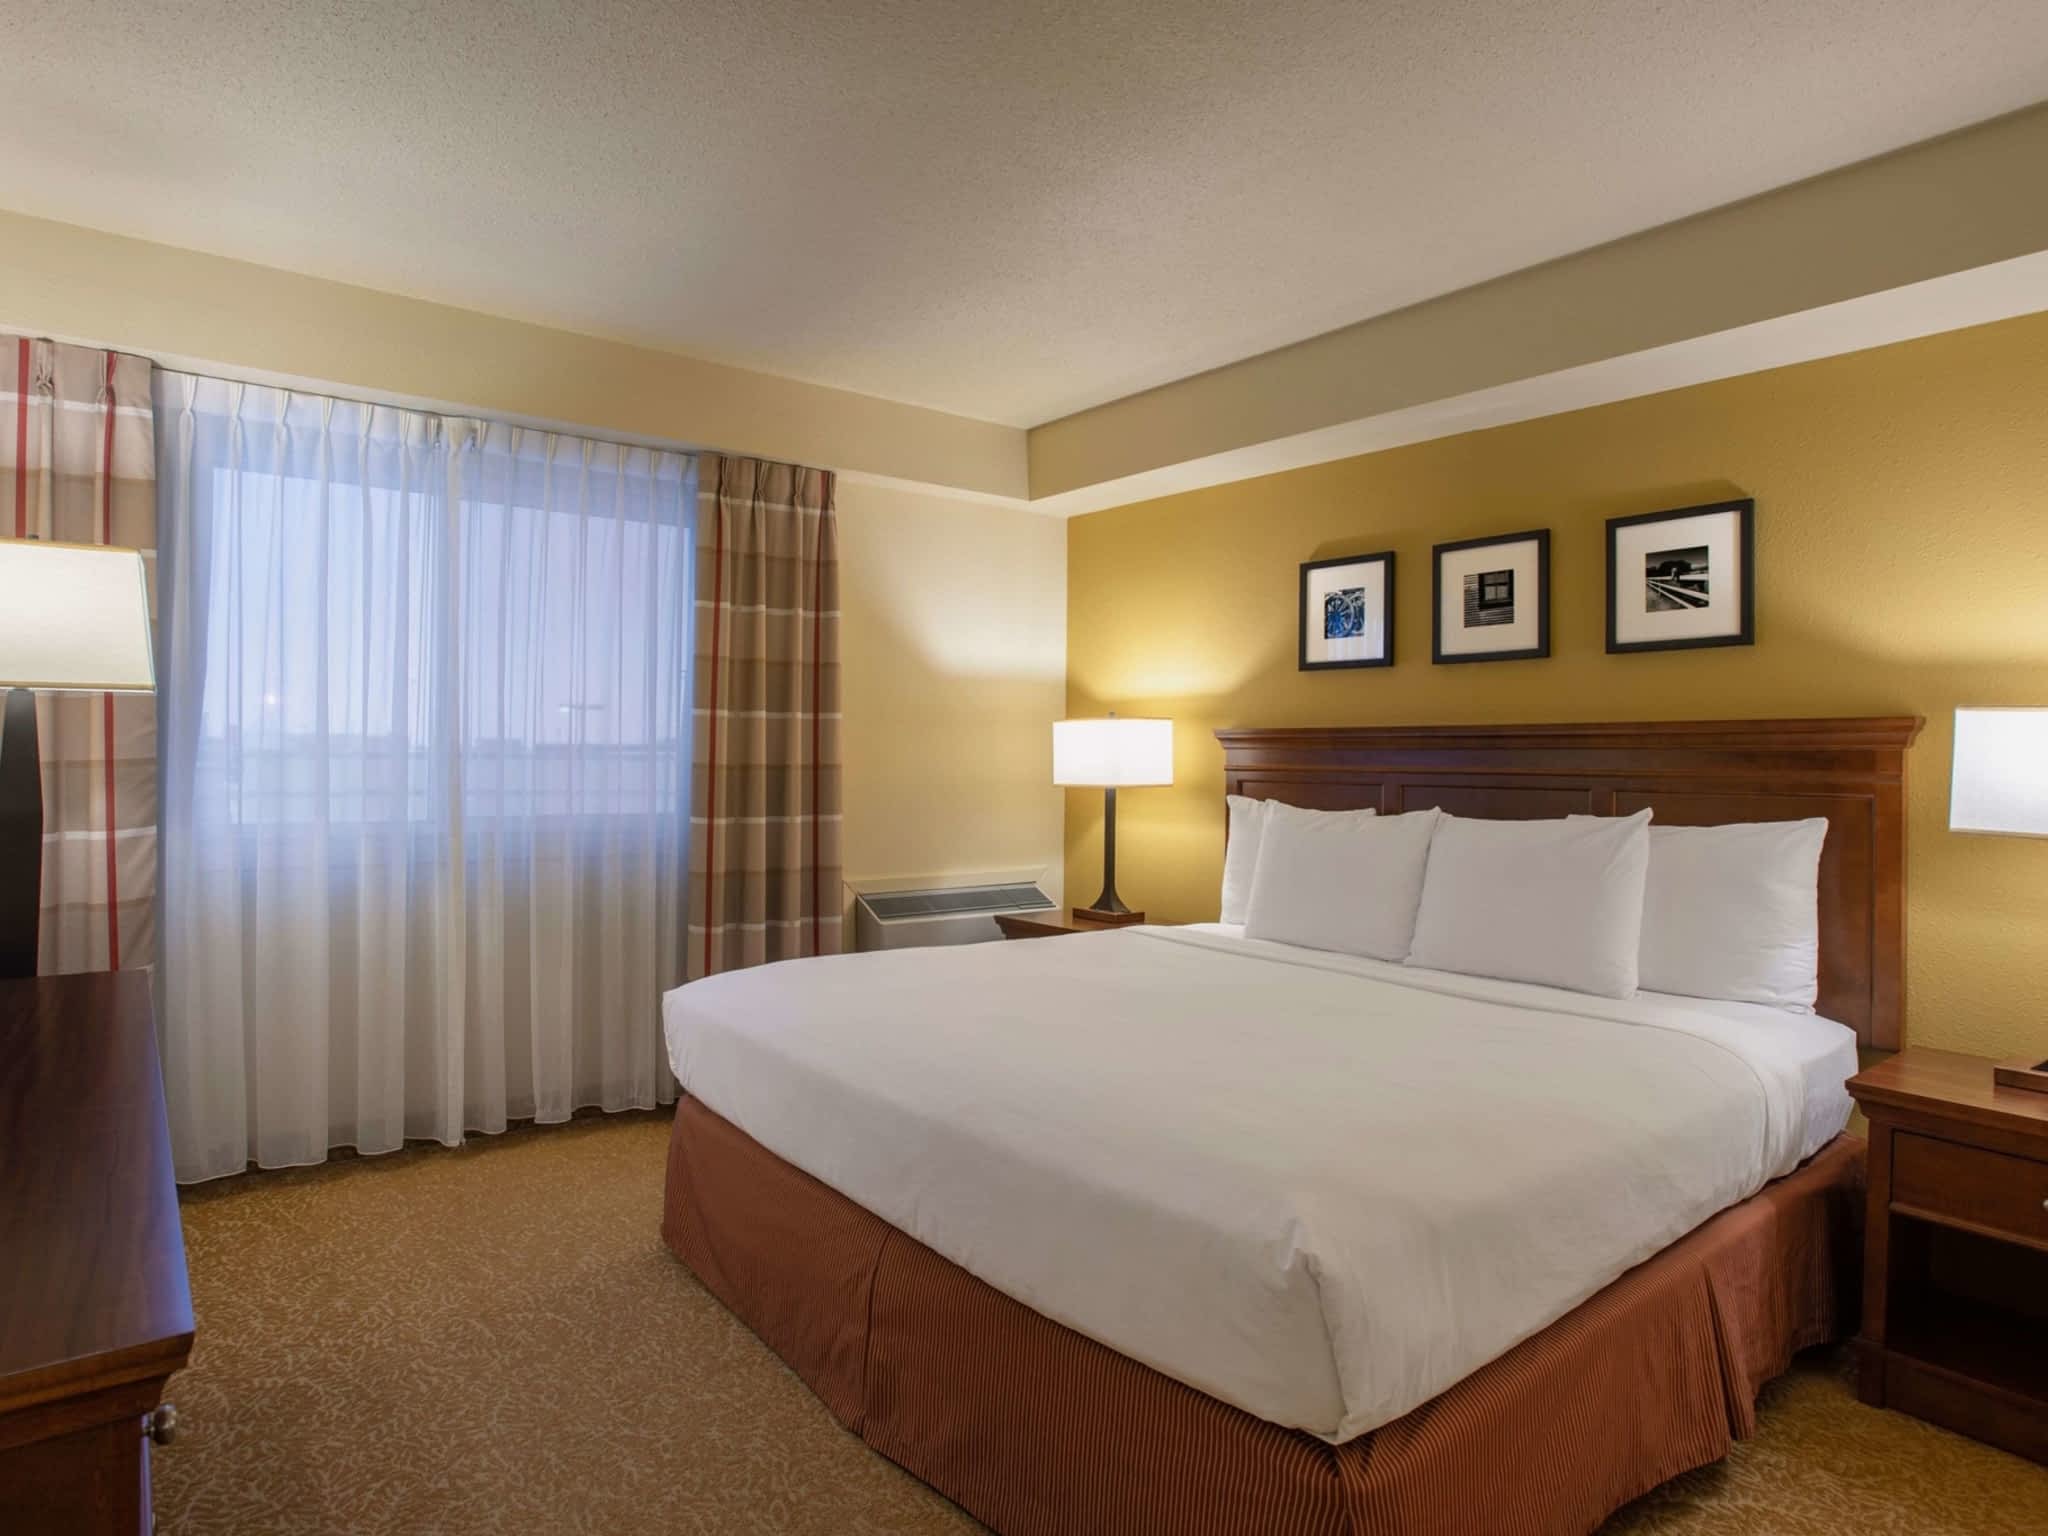 photo Country Inn & Suites by Radisson, Regina, SK - Closed